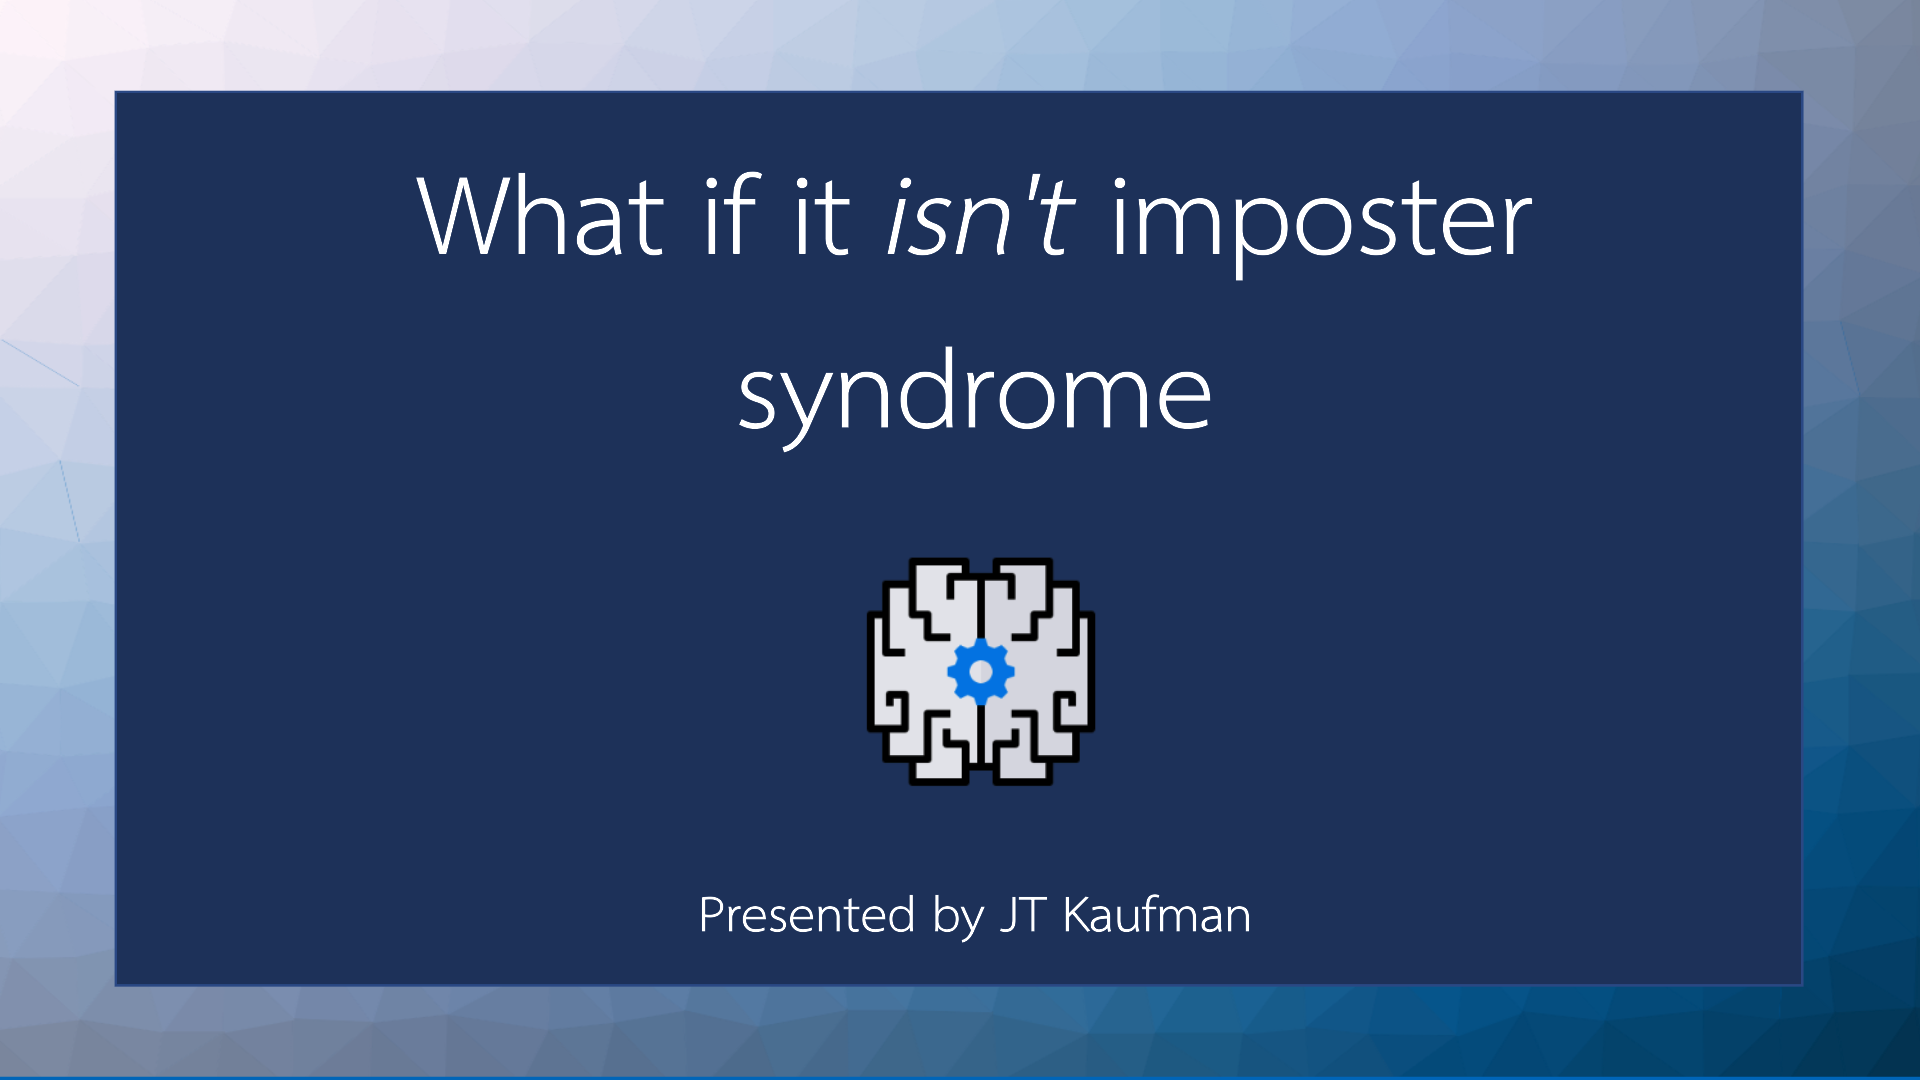 Is it imposter syndrome powerpoint slide